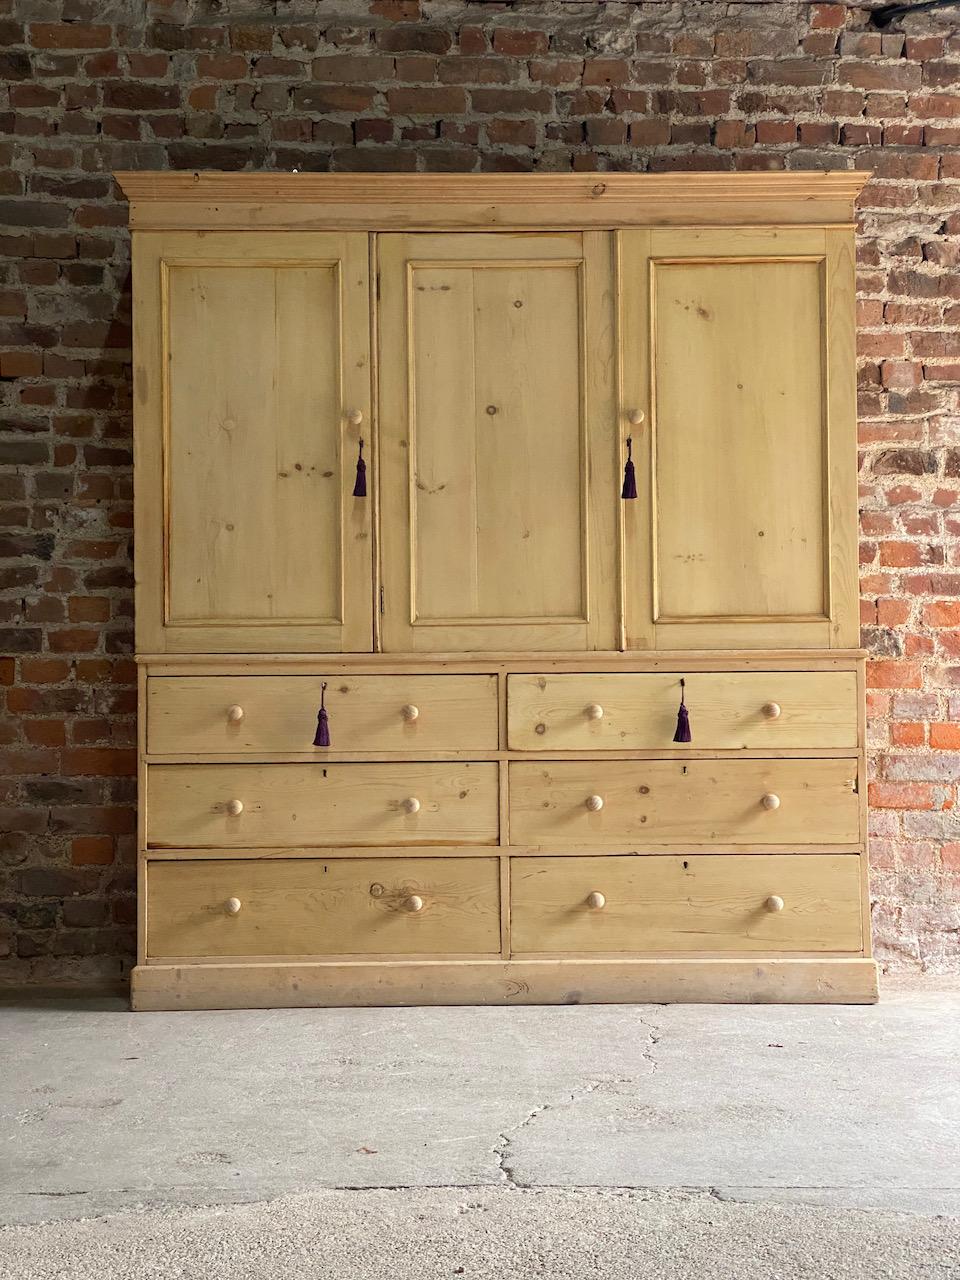 Antique pine housekeepers cupboard 19th century Victorian, circa 1890

Fabulous large Victorian ‘English Country House’ stripped pine housekeepers cupboard 19th century circa 1890, the corniced top above three paneled doors with four adjustable